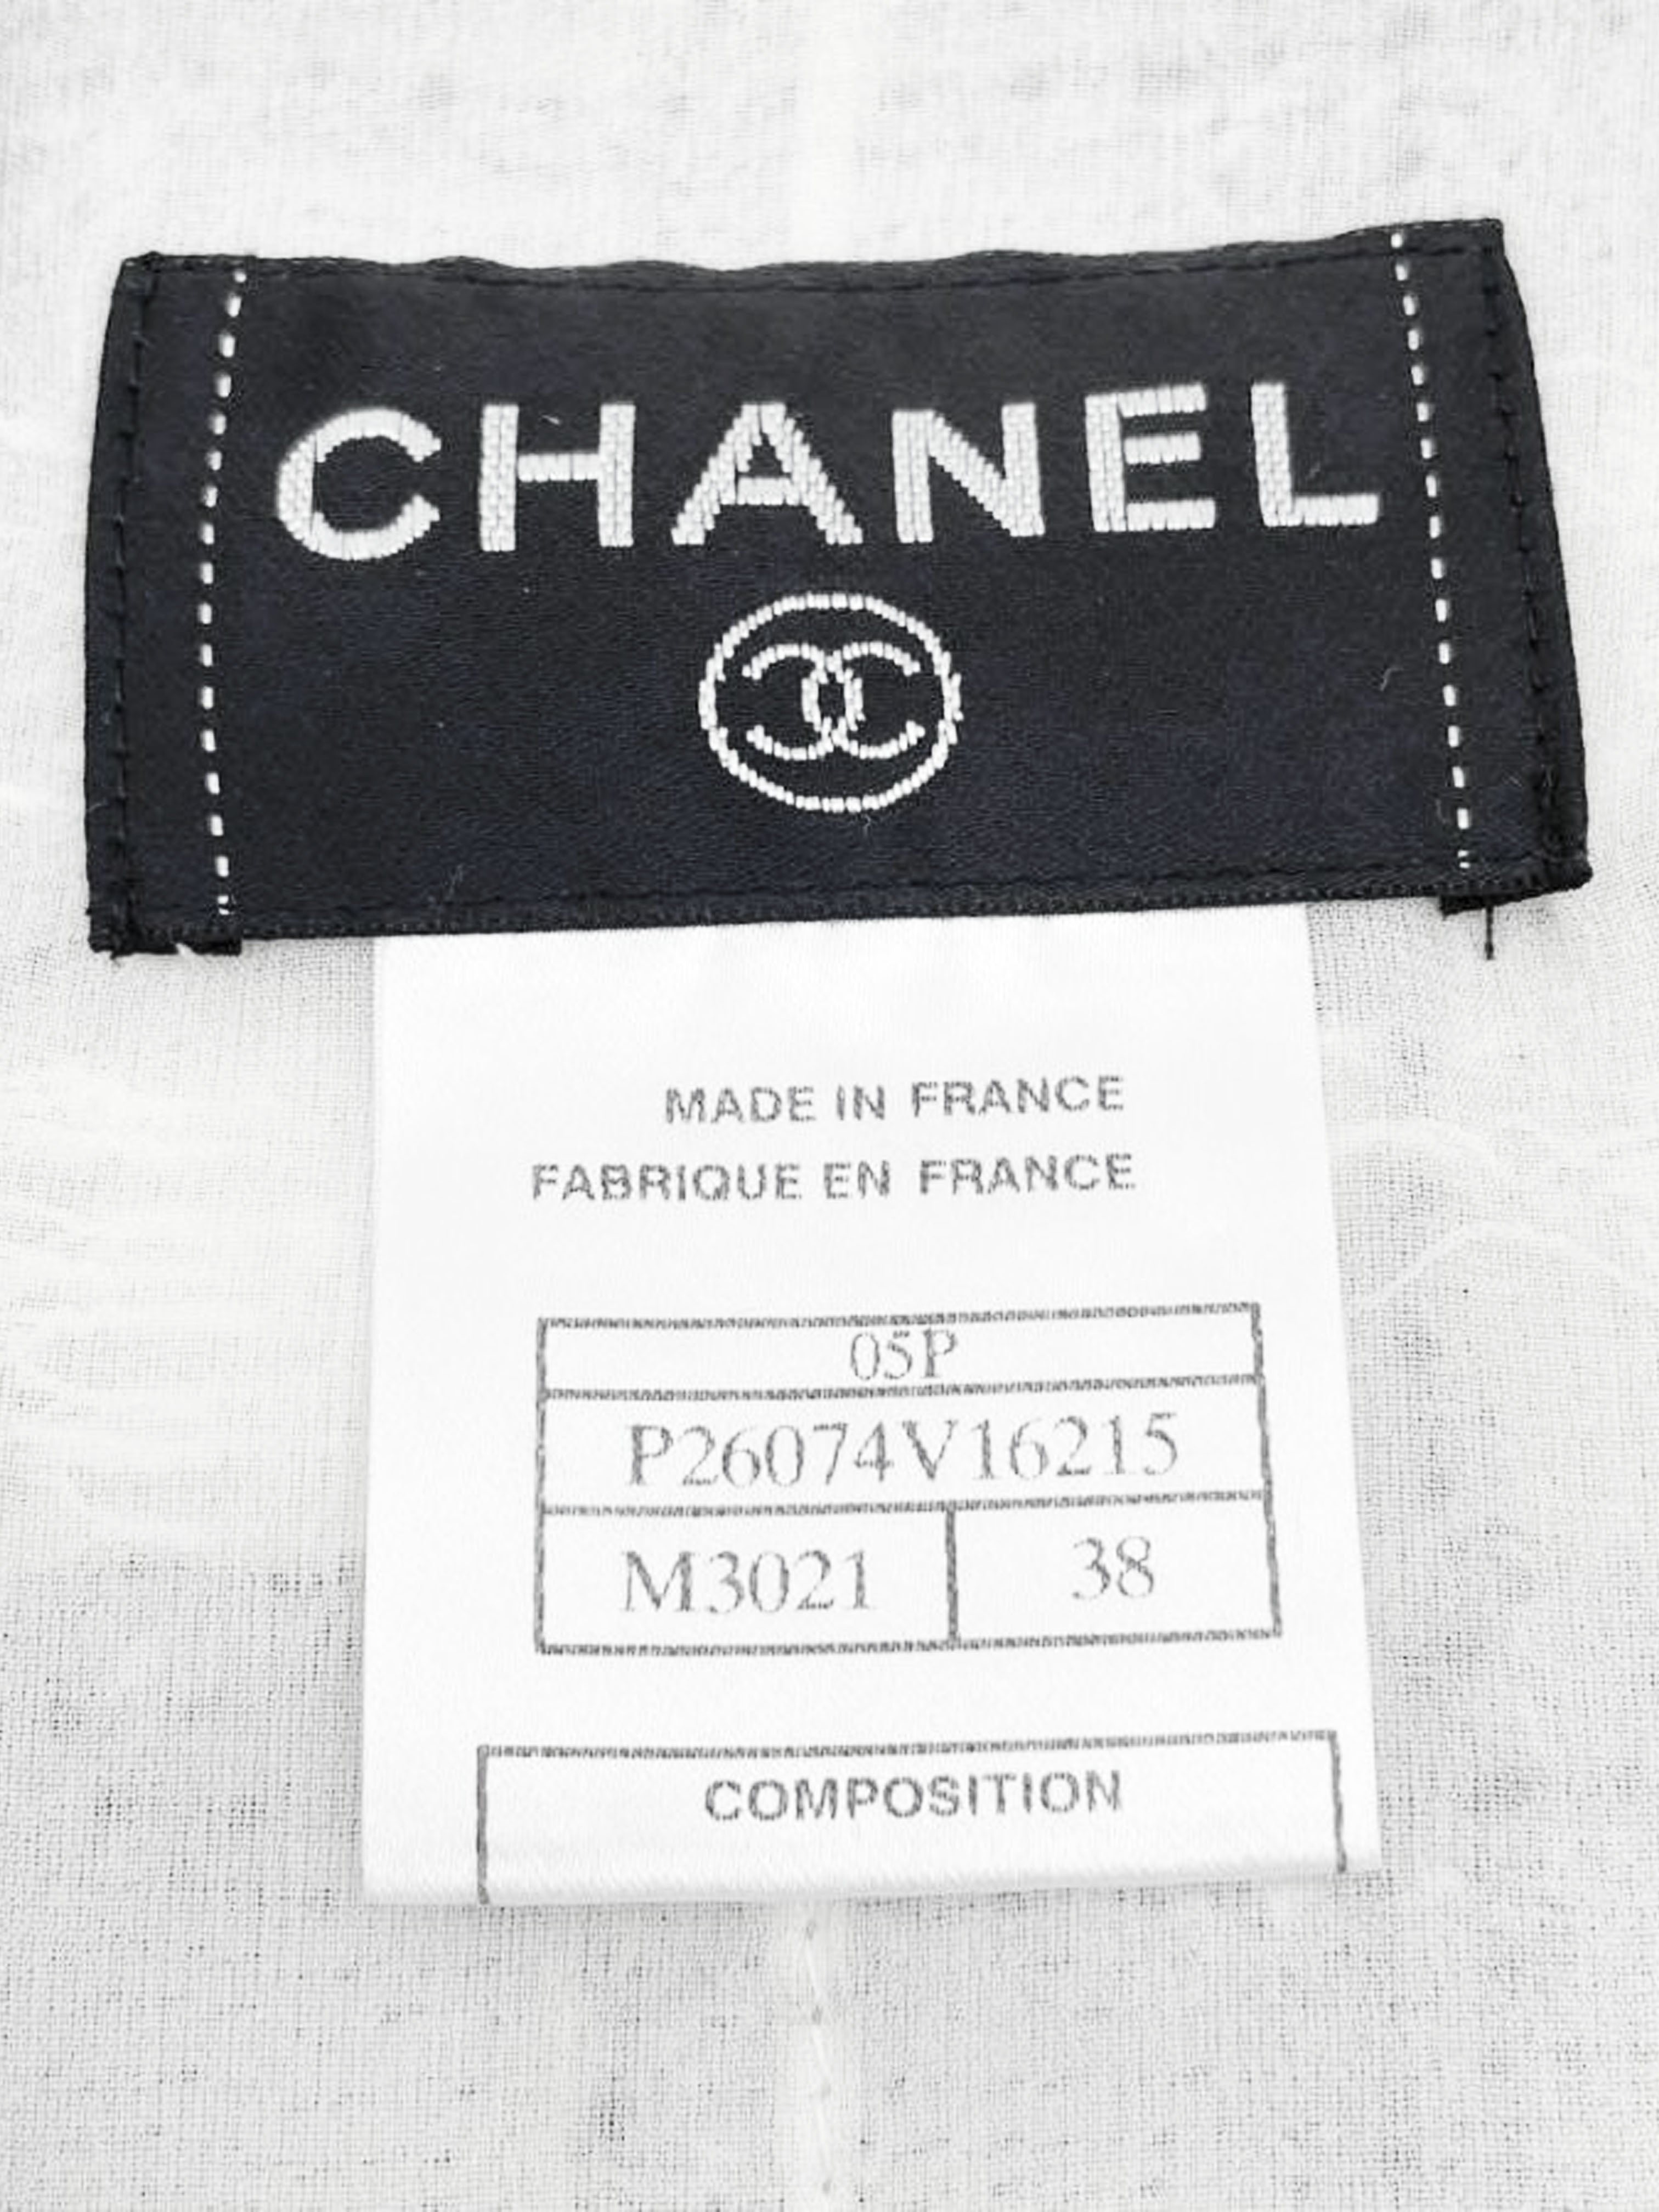 Chanel Spring 2005 Black and White Tweed Long Coat · INTO